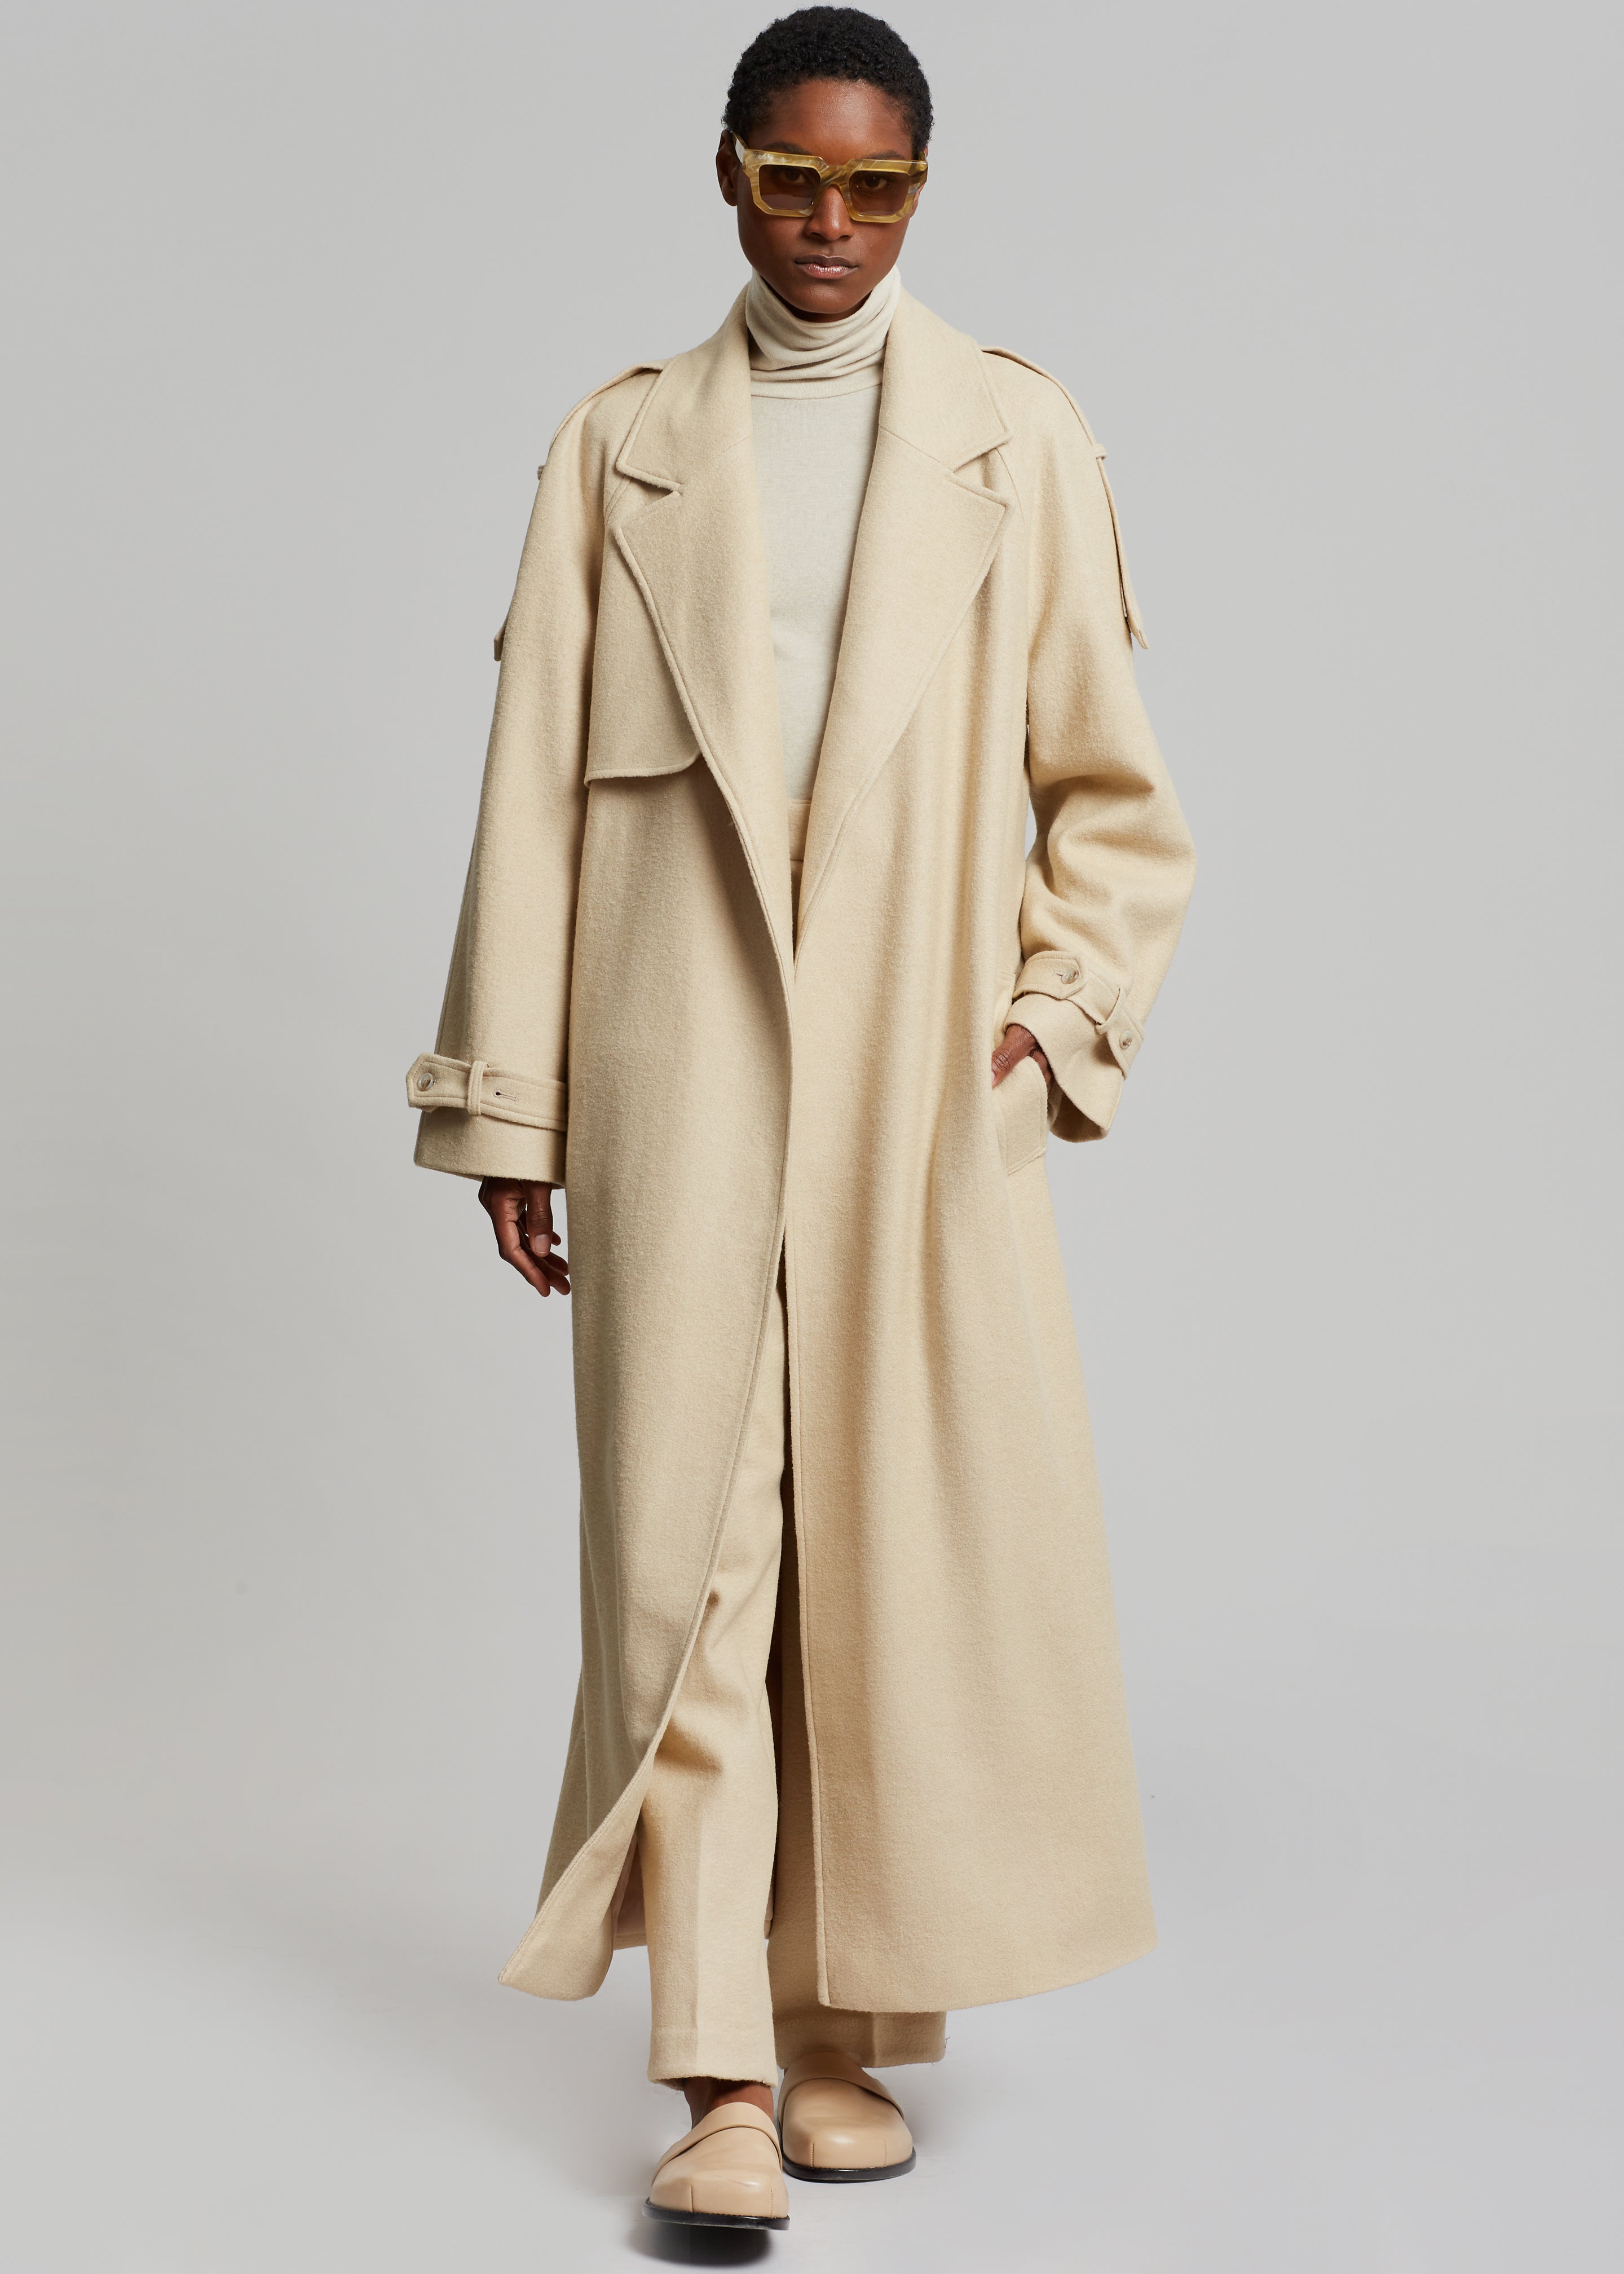 Suzanne Boiled Wool Trench Coat - Beige - 10